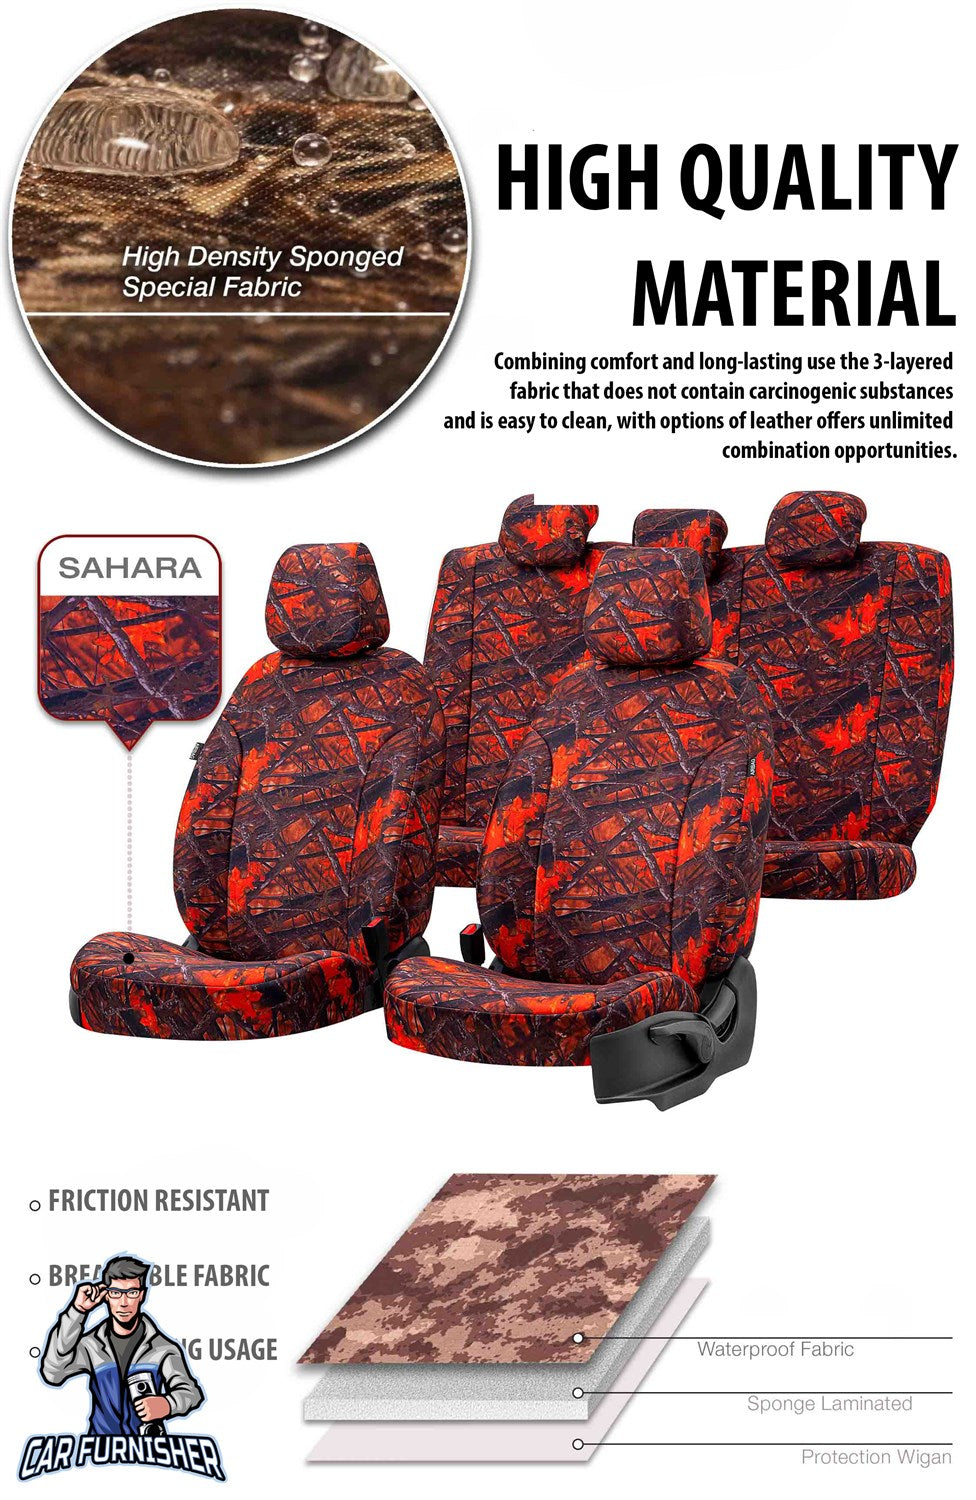 Volvo S80 Seat Cover Camouflage Waterproof Design Montblanc Camo Waterproof Fabric